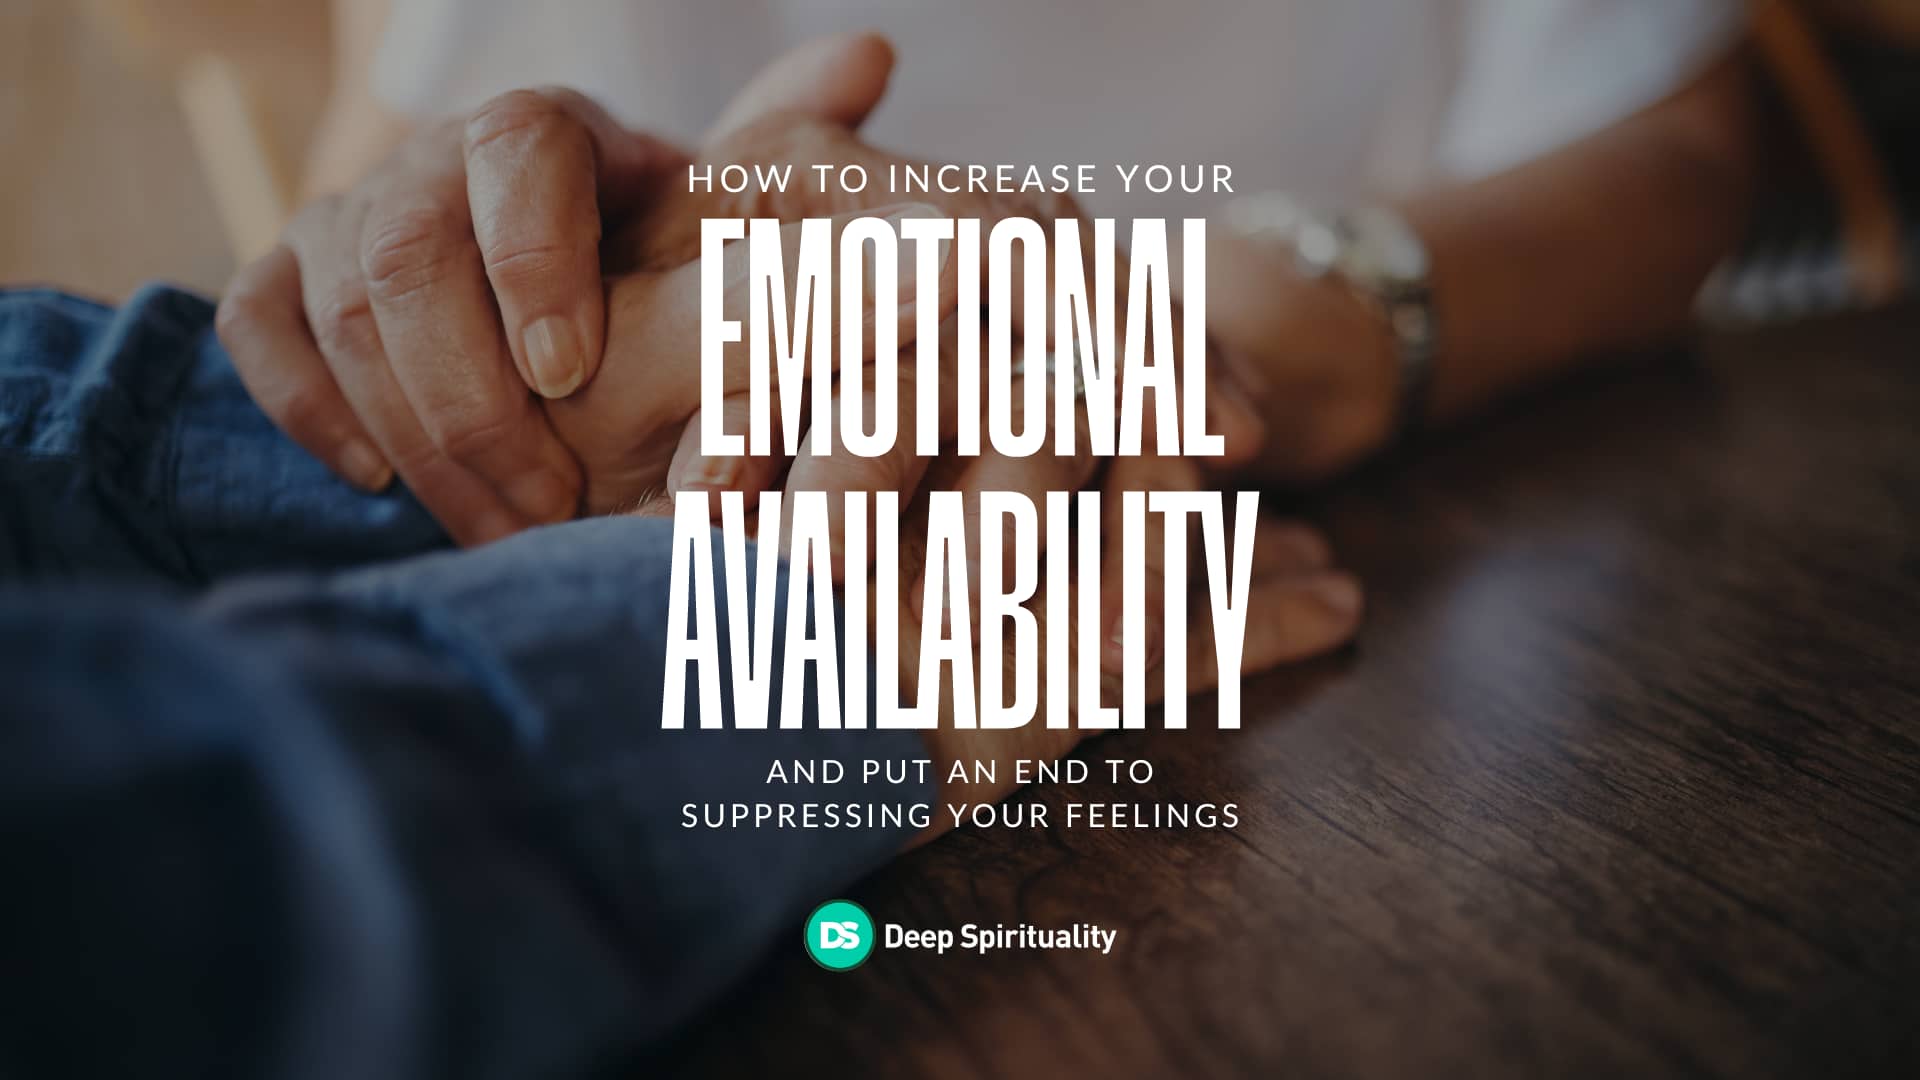 How to Increase Your Emotional Availability and Put an End to Suppressing Your Feelings 15